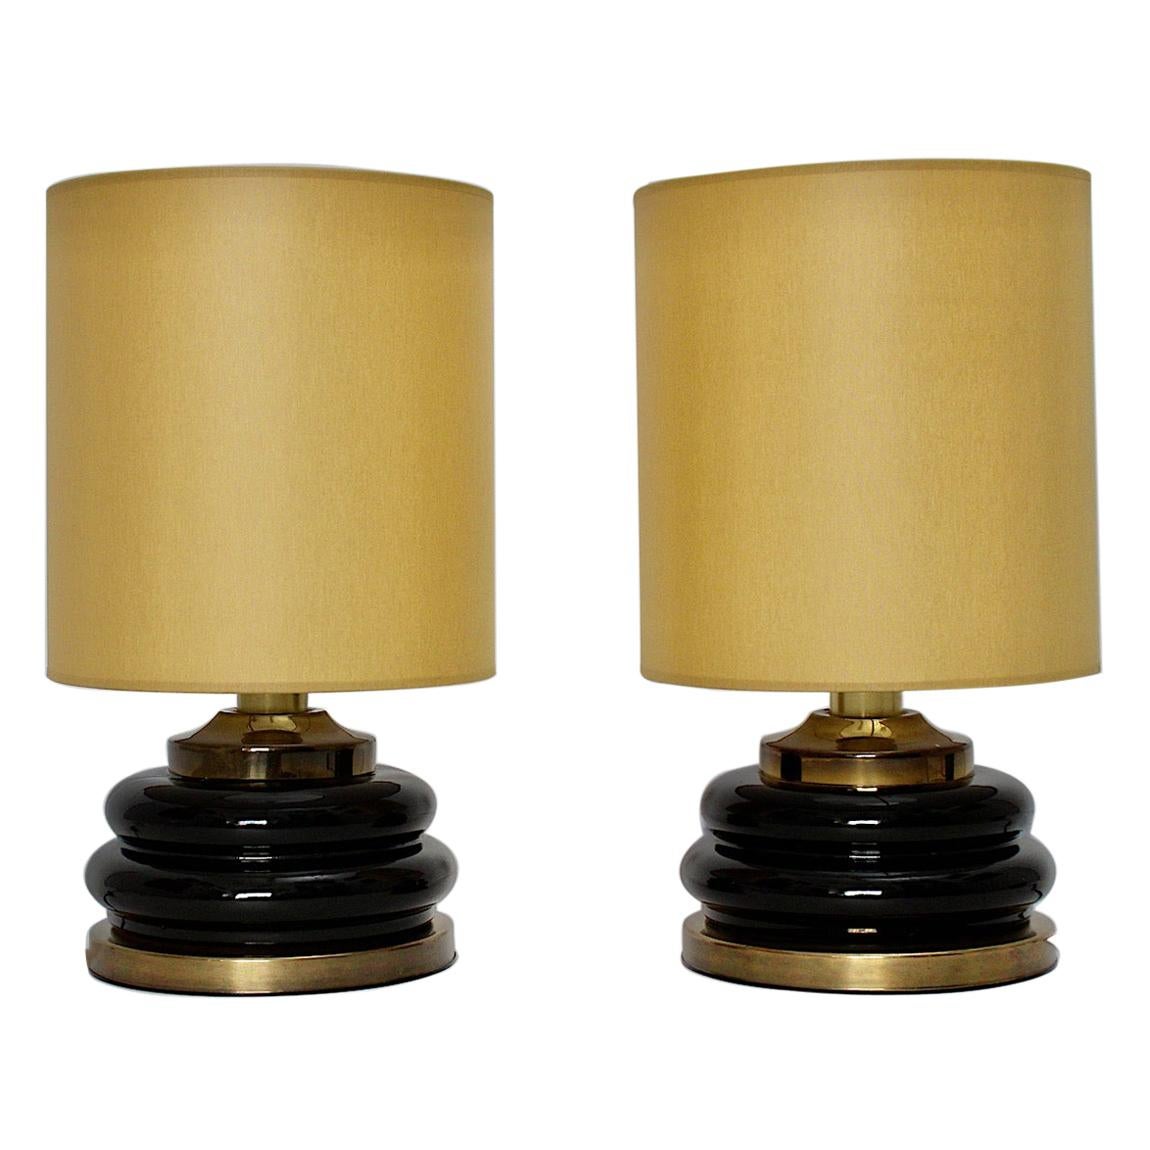 Modernist Brown Gold Glass Vintage Table Lamps Pair Duo, 1970s, Italy For Sale